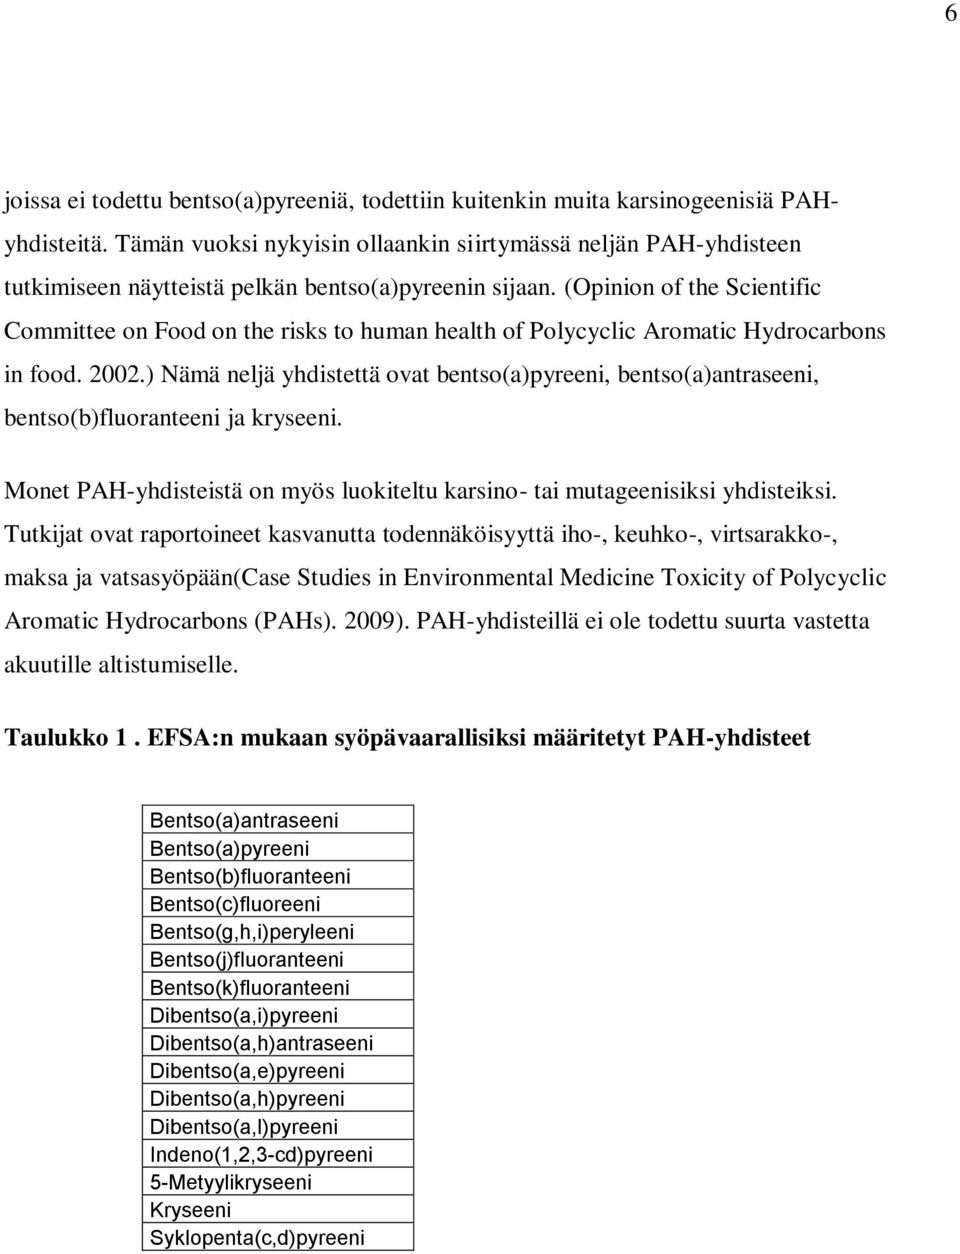 (Opinion of the Scientific Committee on Food on the risks to human health of Polycyclic Aromatic Hydrocarbons in food. 2002.